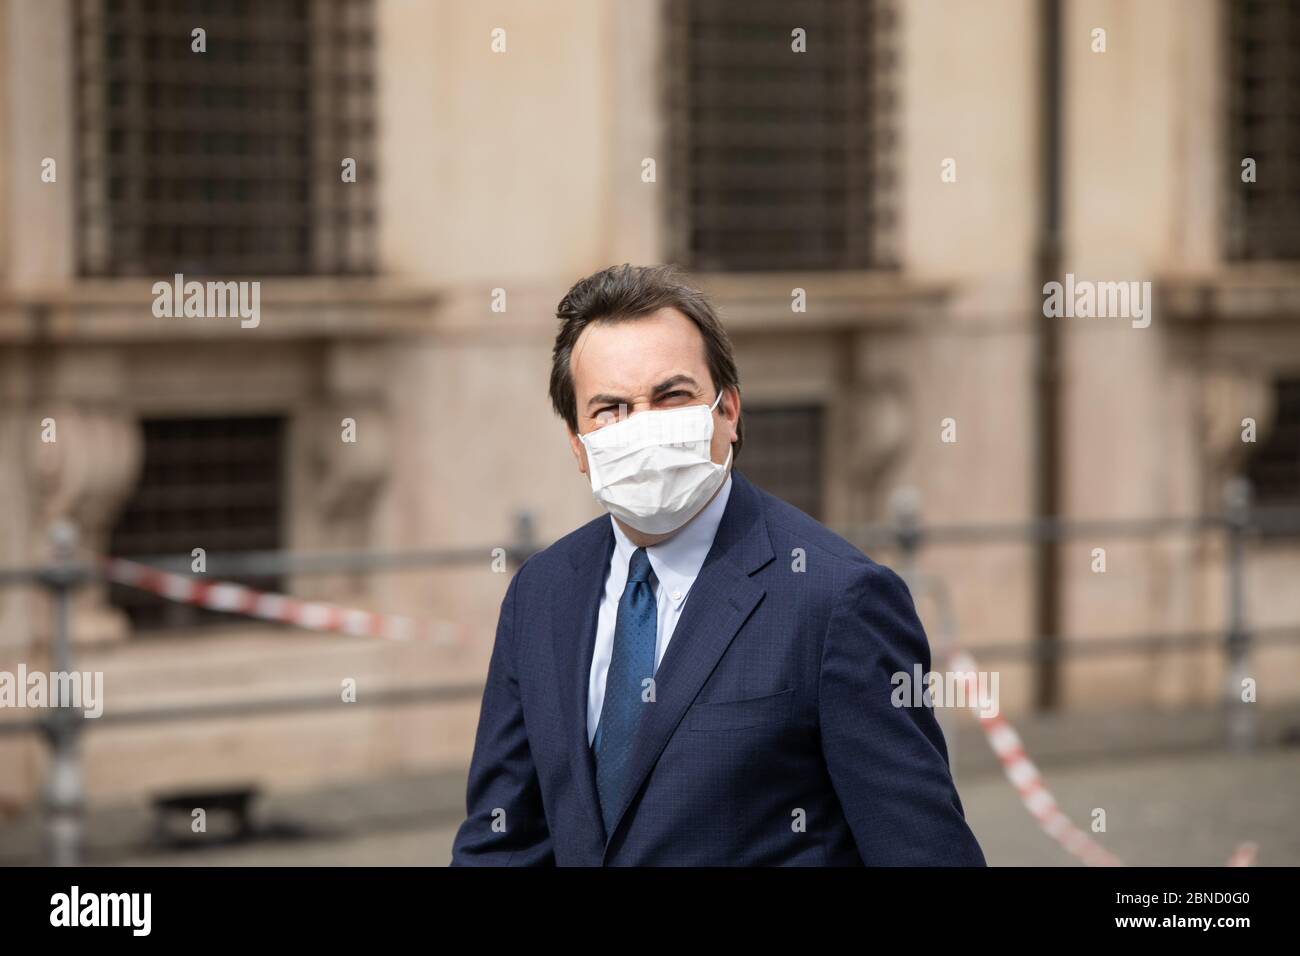 Rome, Italy. 13th May, 2020. Italian Minister for European Affairs, Vincenzo Amendola, enters Palazzo Chigi before the Council of Ministers while wearing a face mask as a precaution against the spread of corona virus. Credit: Cosimo Martemucci/SOPA Images/ZUMA Wire/Alamy Live News Stock Photo